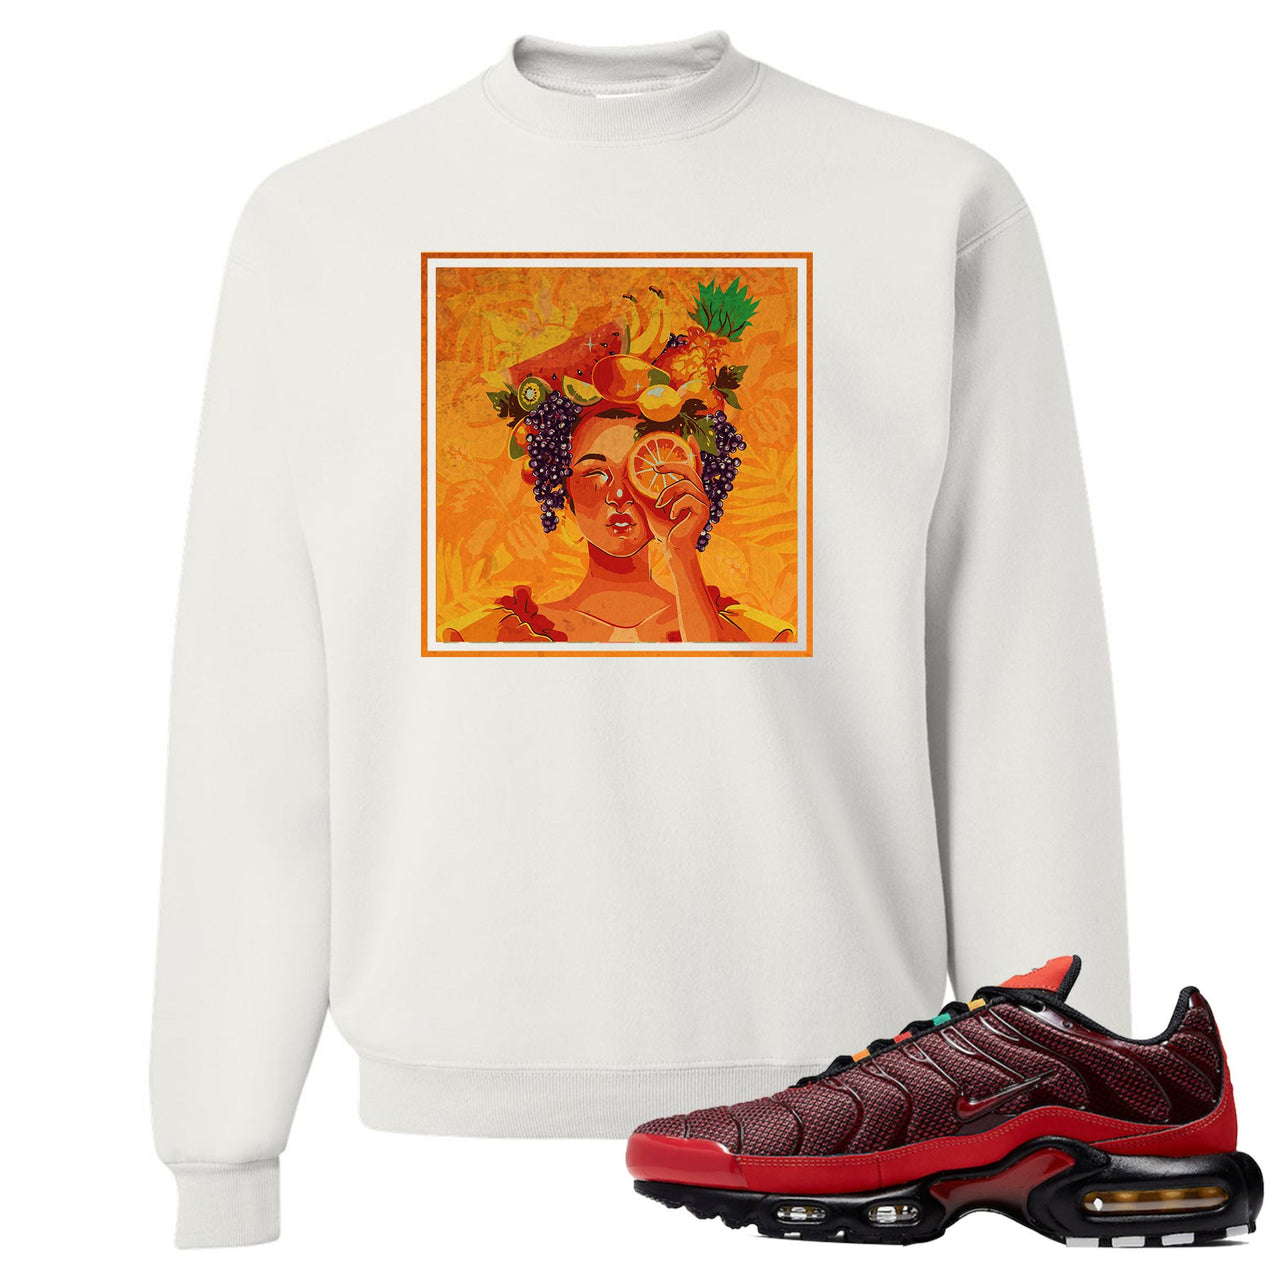 printed on the front of the air max plus sunburst sneaker matching white crewneck sweatshirt is the lady fruit logo